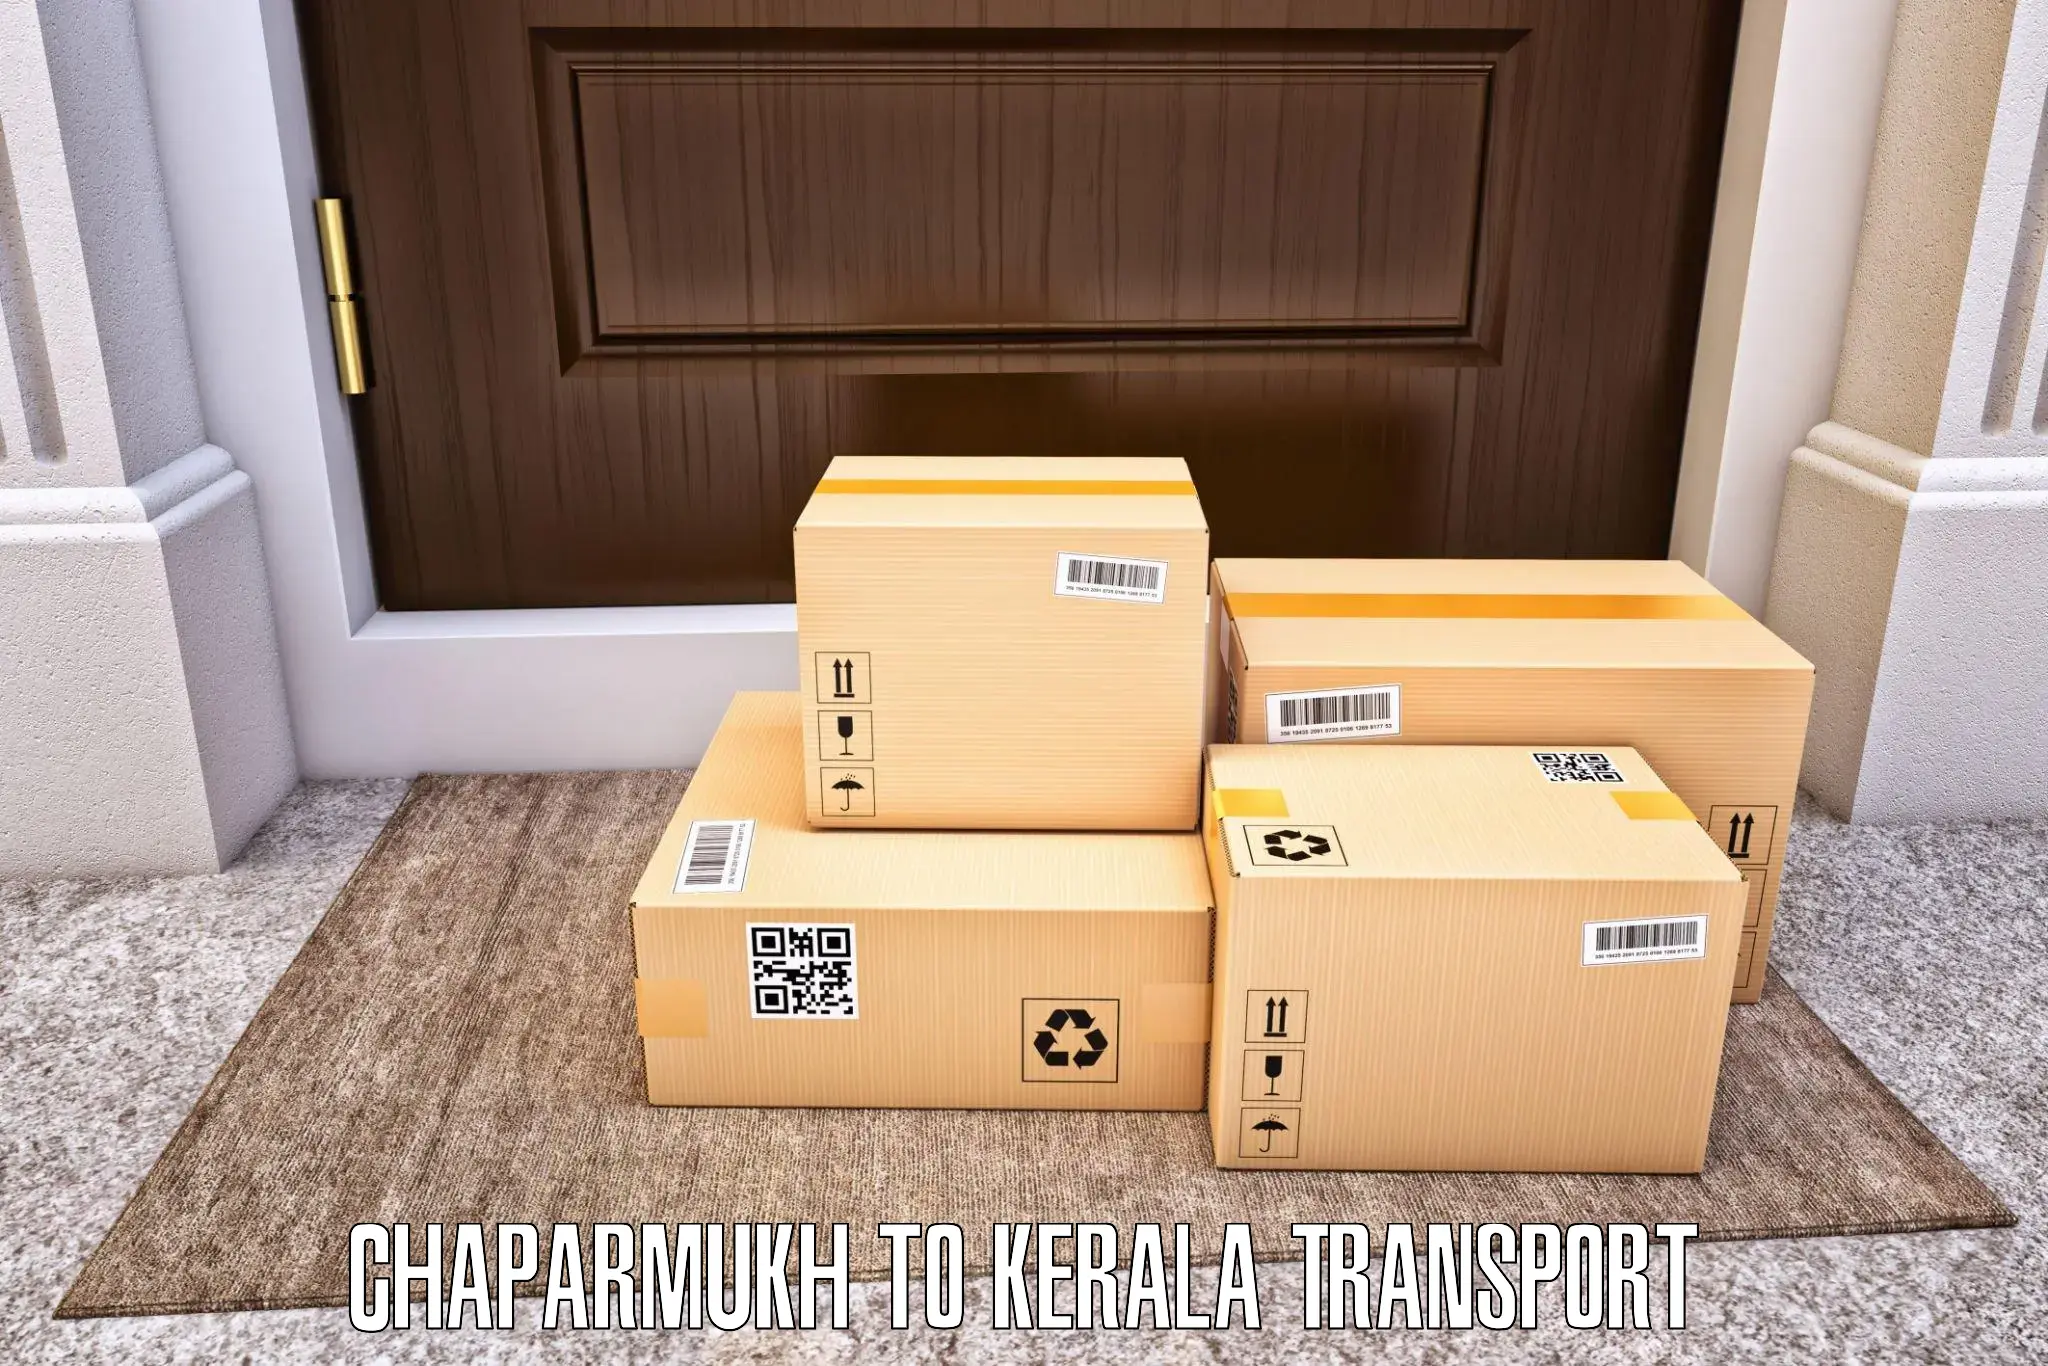 Scooty transport charges Chaparmukh to Ranni